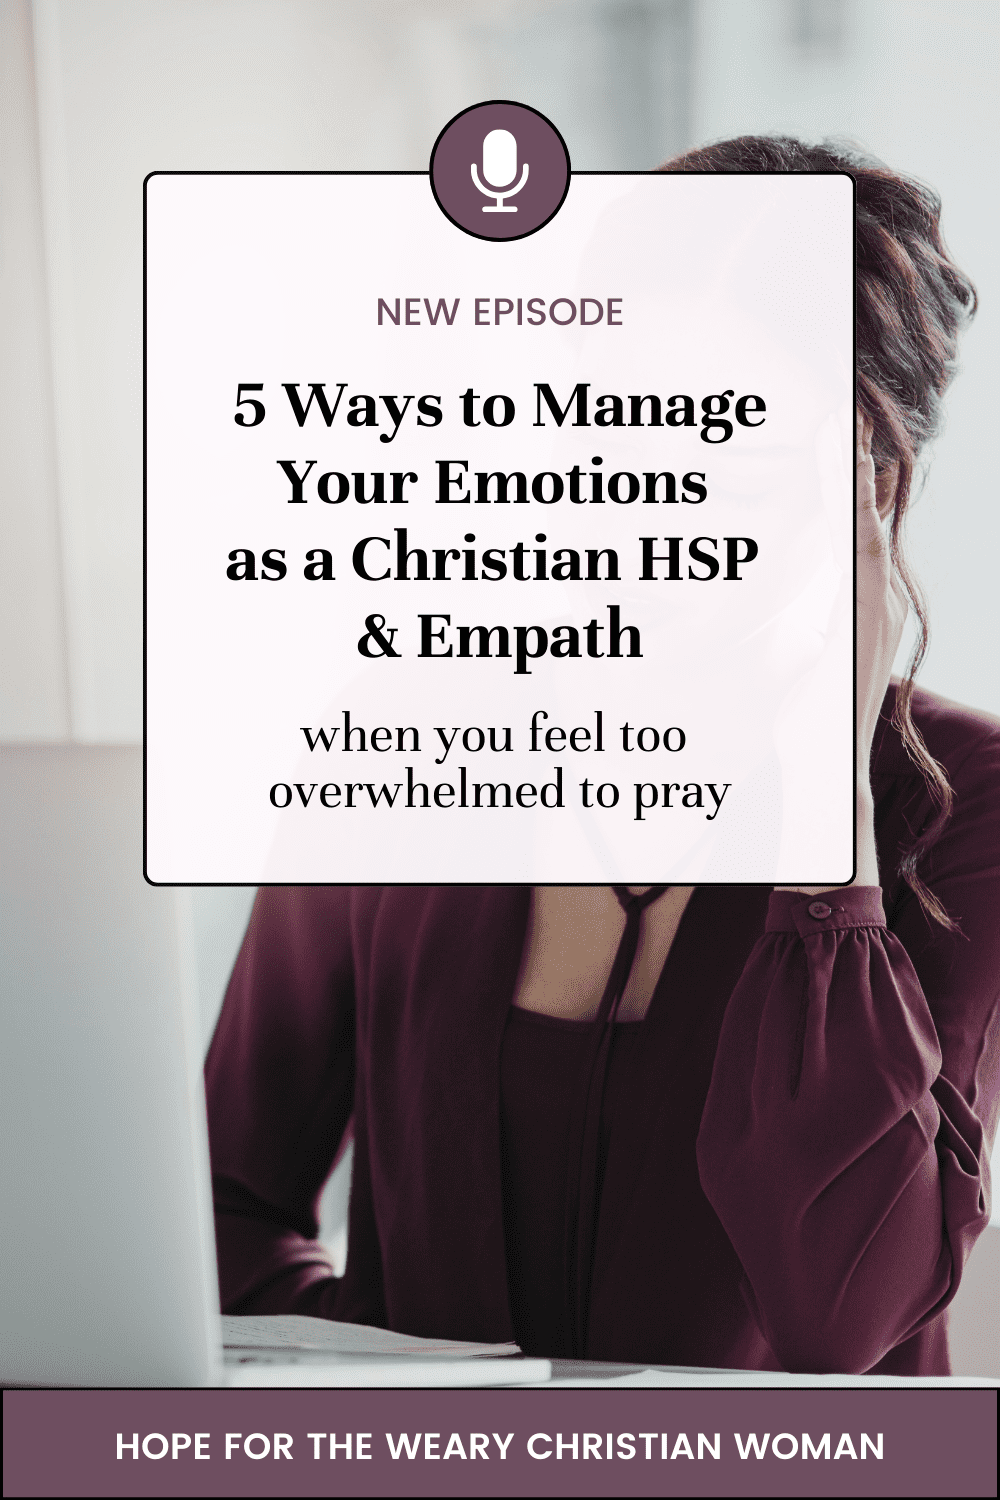 Do you know how to manage your emotions as a highly sensitive introverted Christian woman? Learn these five ways to cope with life so you can continue to pray for others and show up for life when you feel overwhelmed as a Christian empath.